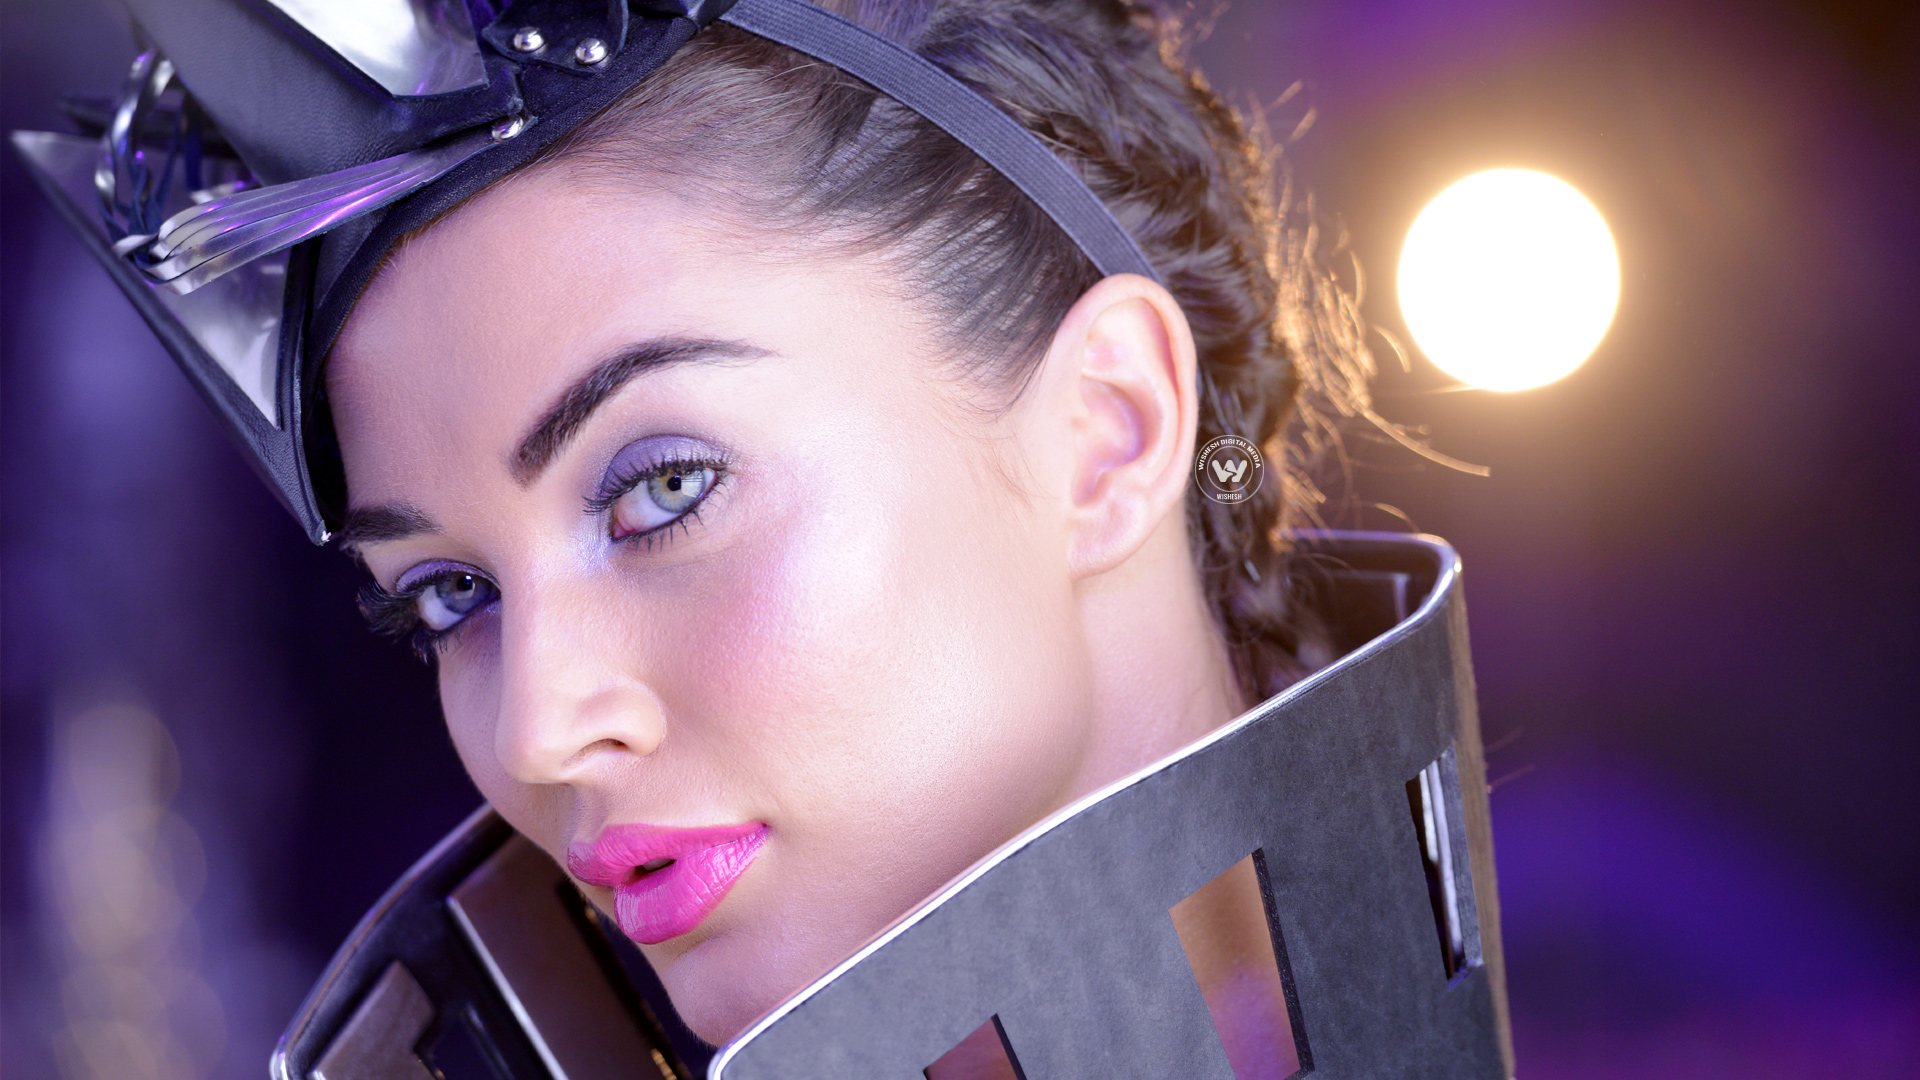 0 Movie Latest Hd Wallpapers - Amy Jackson In 2.0 Movie - HD Wallpaper 